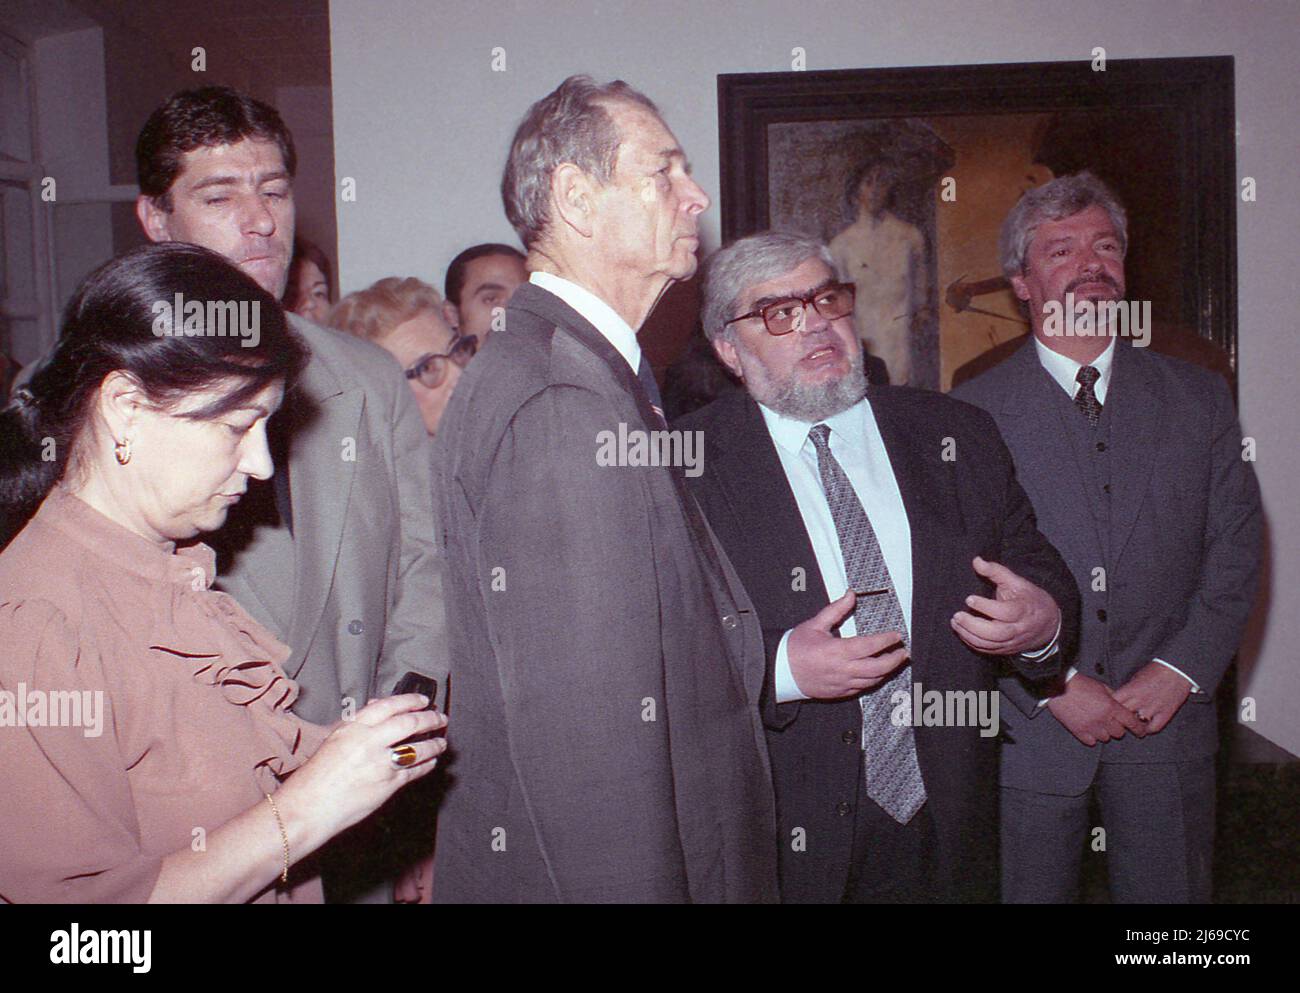 National Museum of Romanian Literature in Bucharest, Romania, approx. 1996. King Michael I of Romania with philosopher and essayist Andrei Plesu. Stock Photo